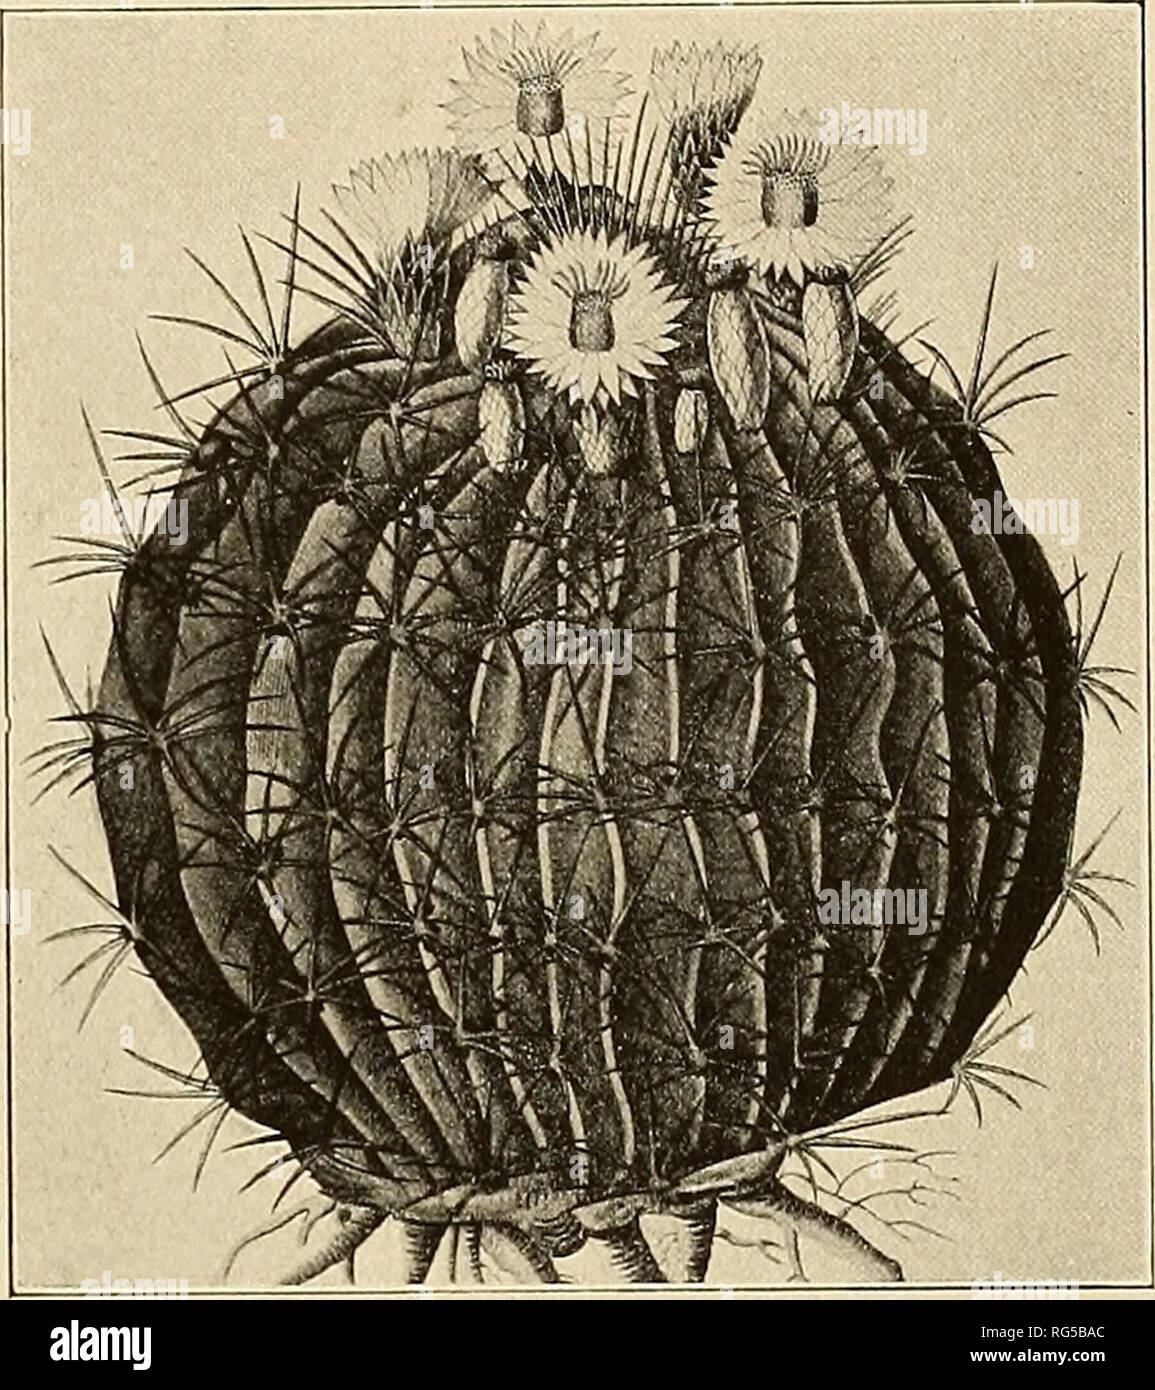 . The Cactaceae : descriptions and illustrations of plants of the cactus family. FEROCACTUS. 139 Echinocactus pfersdorffii Hortus may be referable here. It is probable that E. pfers- dorffii Hildmann Catalogue (Monatssehr. Kakteenk. 5: 92. 1905) is the same, but neither was accompanied by a description. In cultivation this plant is simple, depressed-globose, 4.5 dm. in diameter, but in the wild state sometimes cylindric and up to 6 dm. high, and described as proliferous; ribs 20, perhaps even more, acute; areoles rather large, distant; radial spines usually 8, subulate, somewhat curved, 4.5 cm Stock Photo